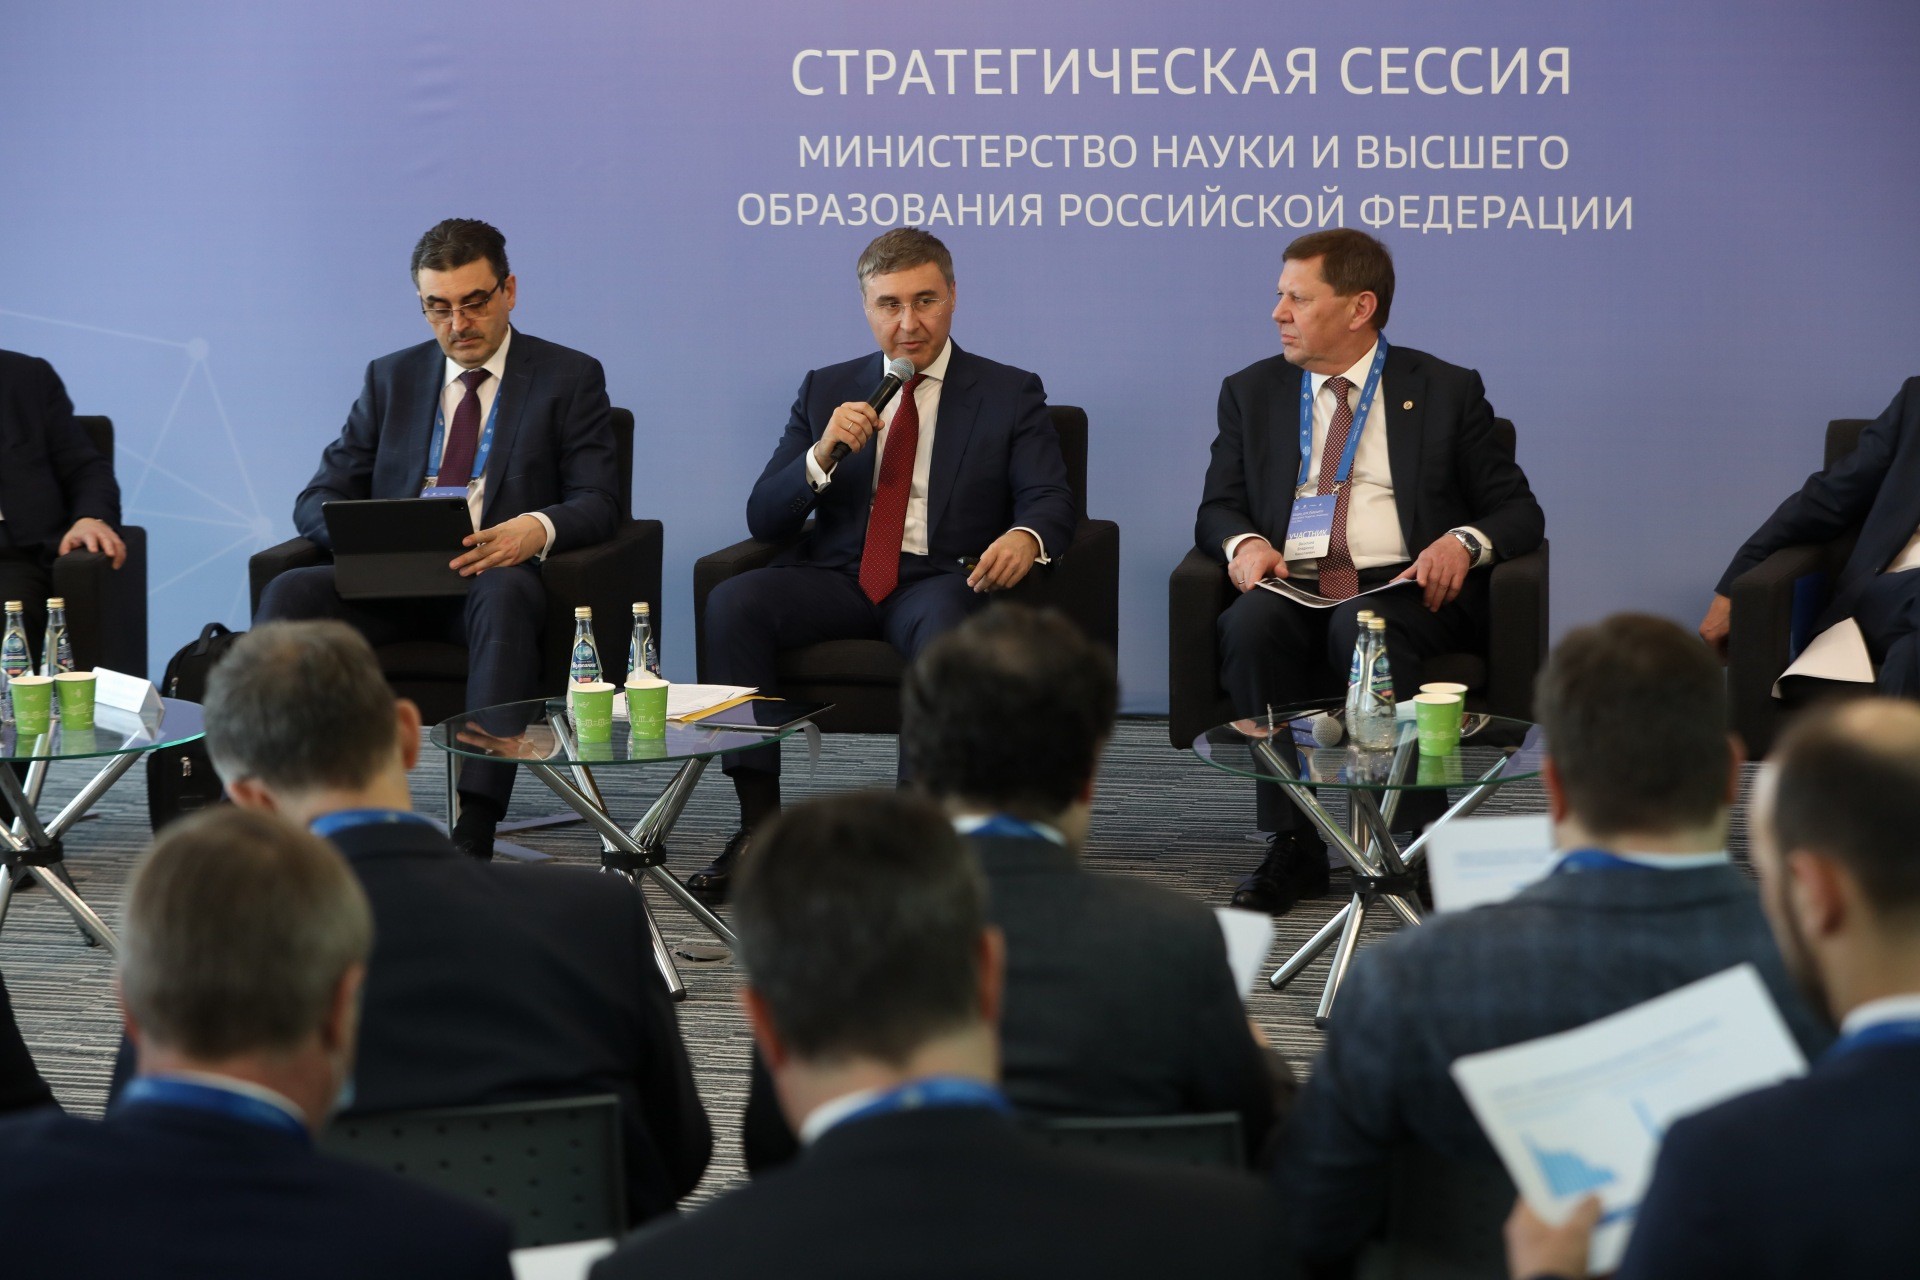 Rector Ilshat Gafurov joined strategic session led by Minister of Science and Higher Education Valery Falkov ,Ministry of Science and Higher Education of Russia, Government of Russia, Innopolis